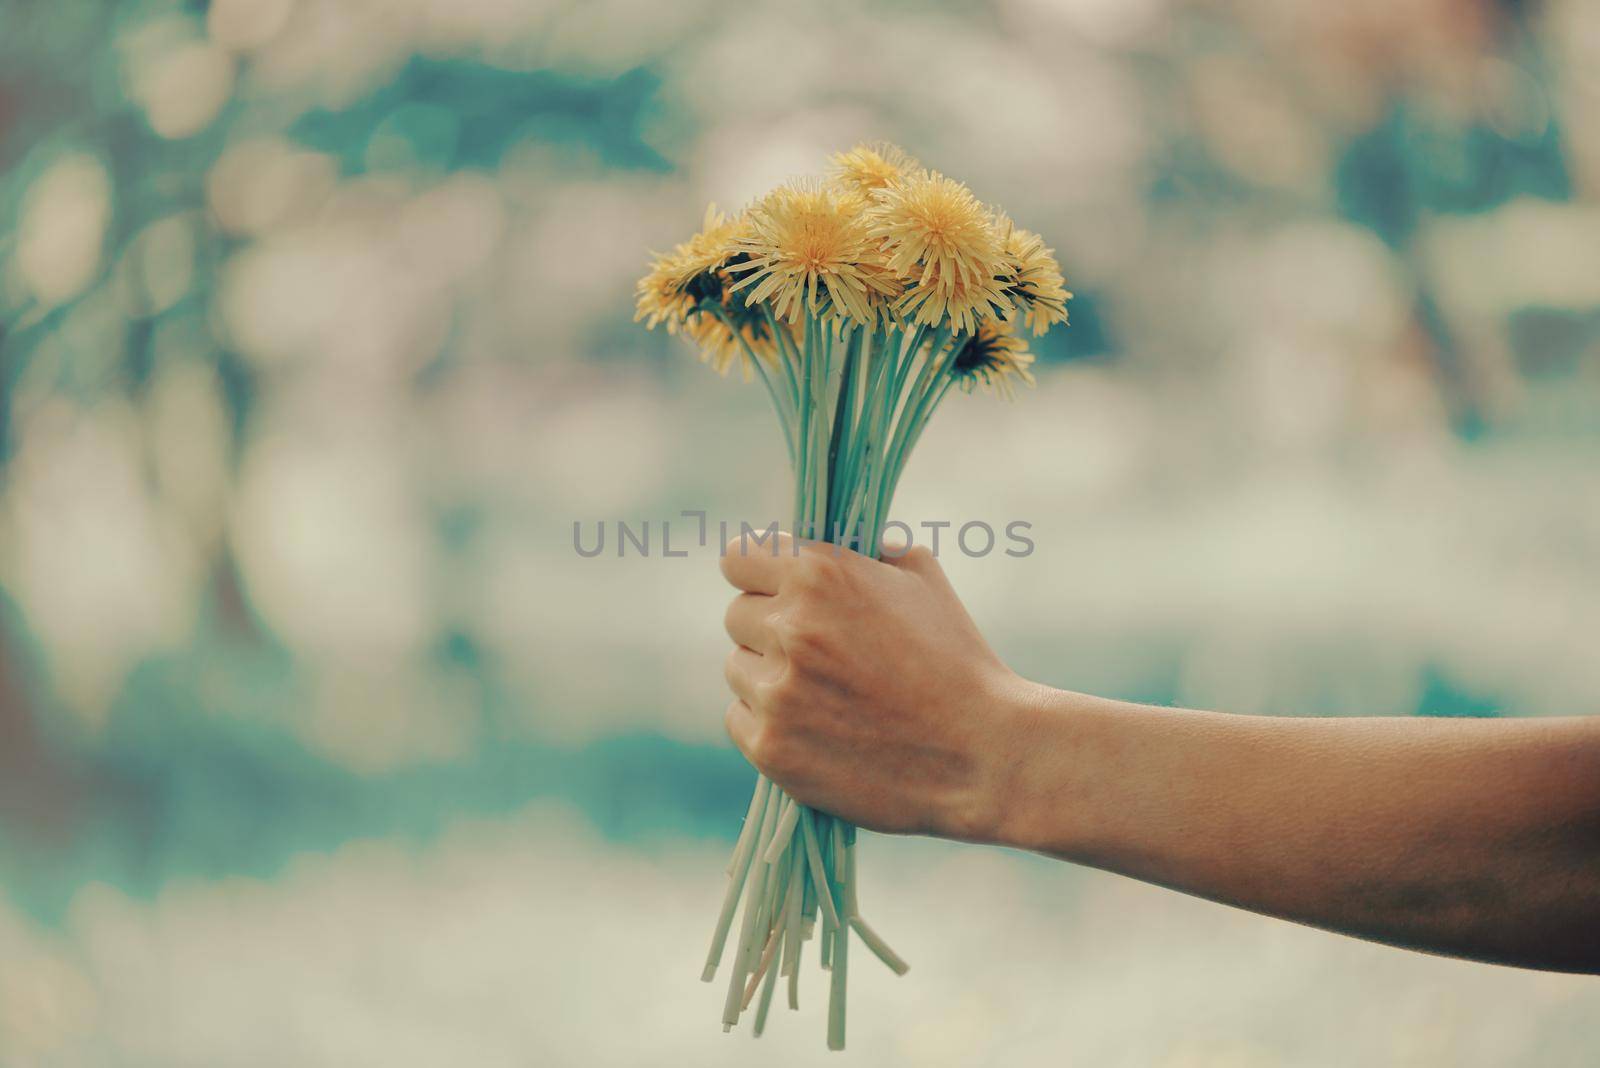 Woman holding bouquet of yellow dandelions outdoor in summer, close-up of hand with flowers. Image with instagram filter